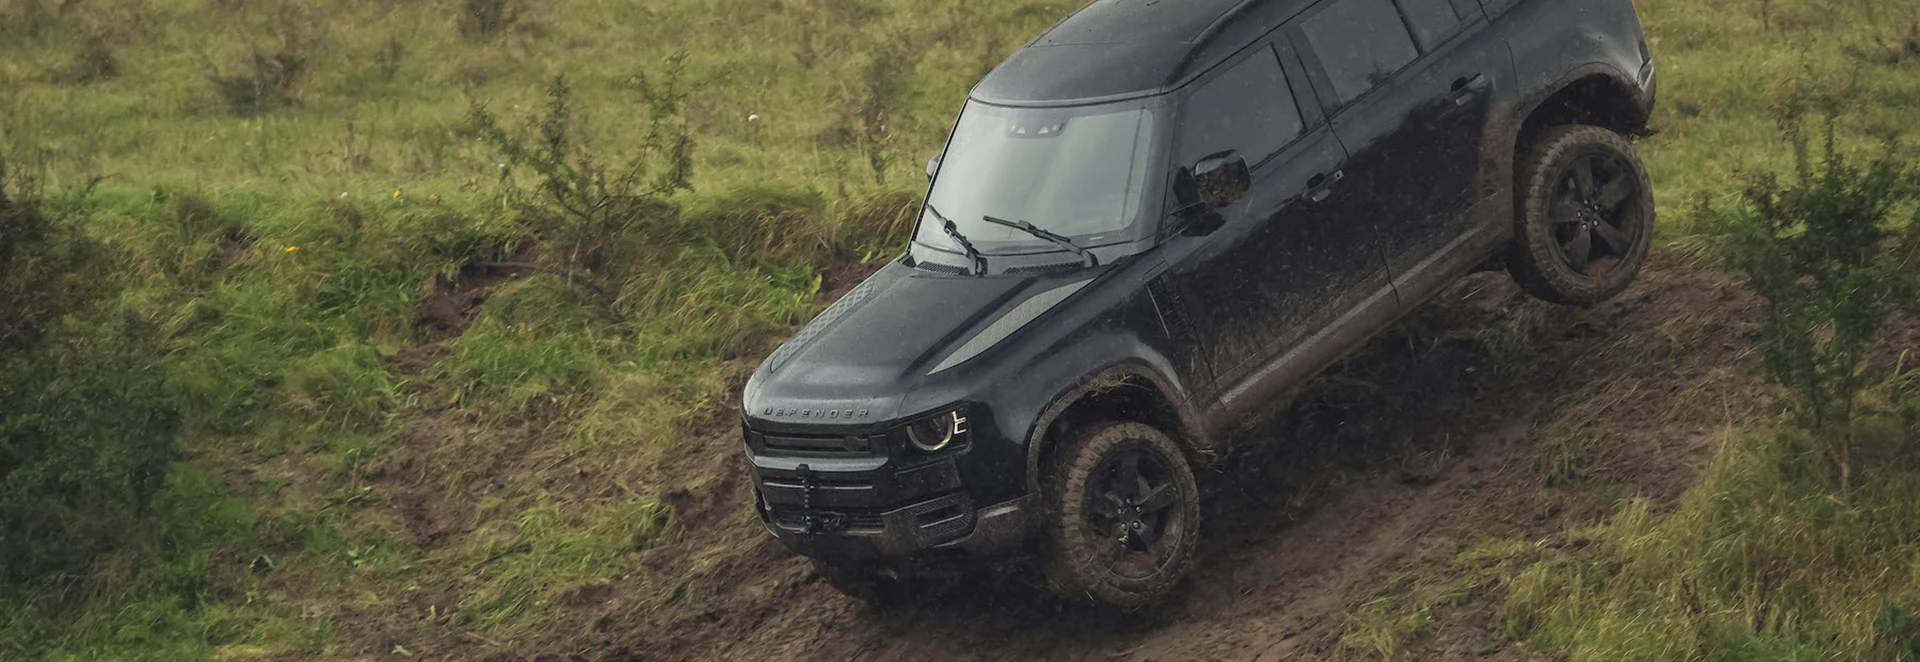 New Land Rover Defender gets starring role in upcoming James Bond film